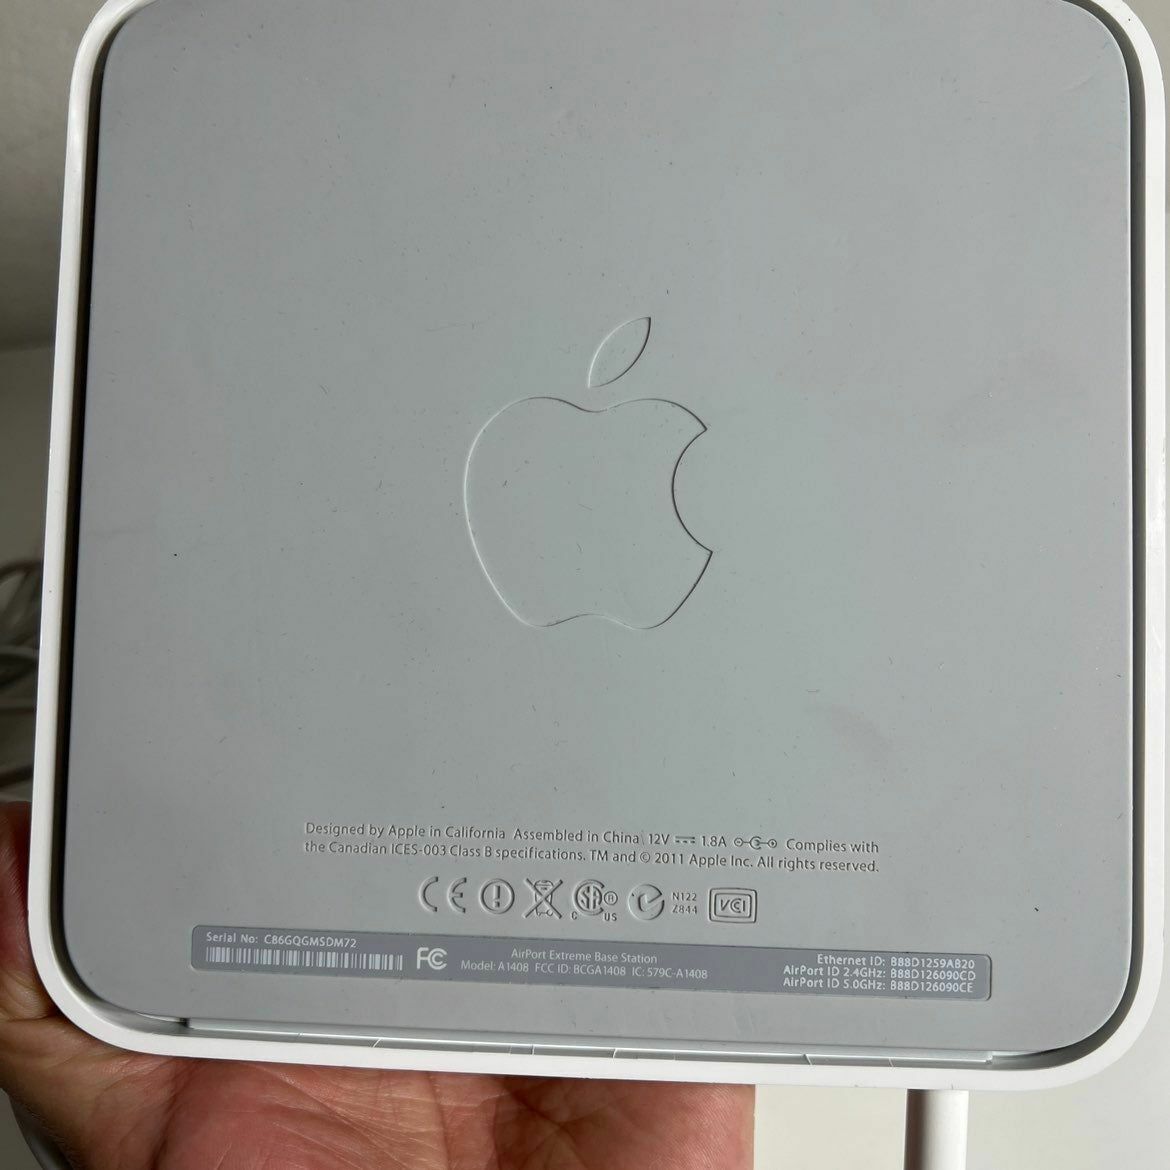 Internet Router Apple Airport Extreme Base Station Model A1408 Home Network